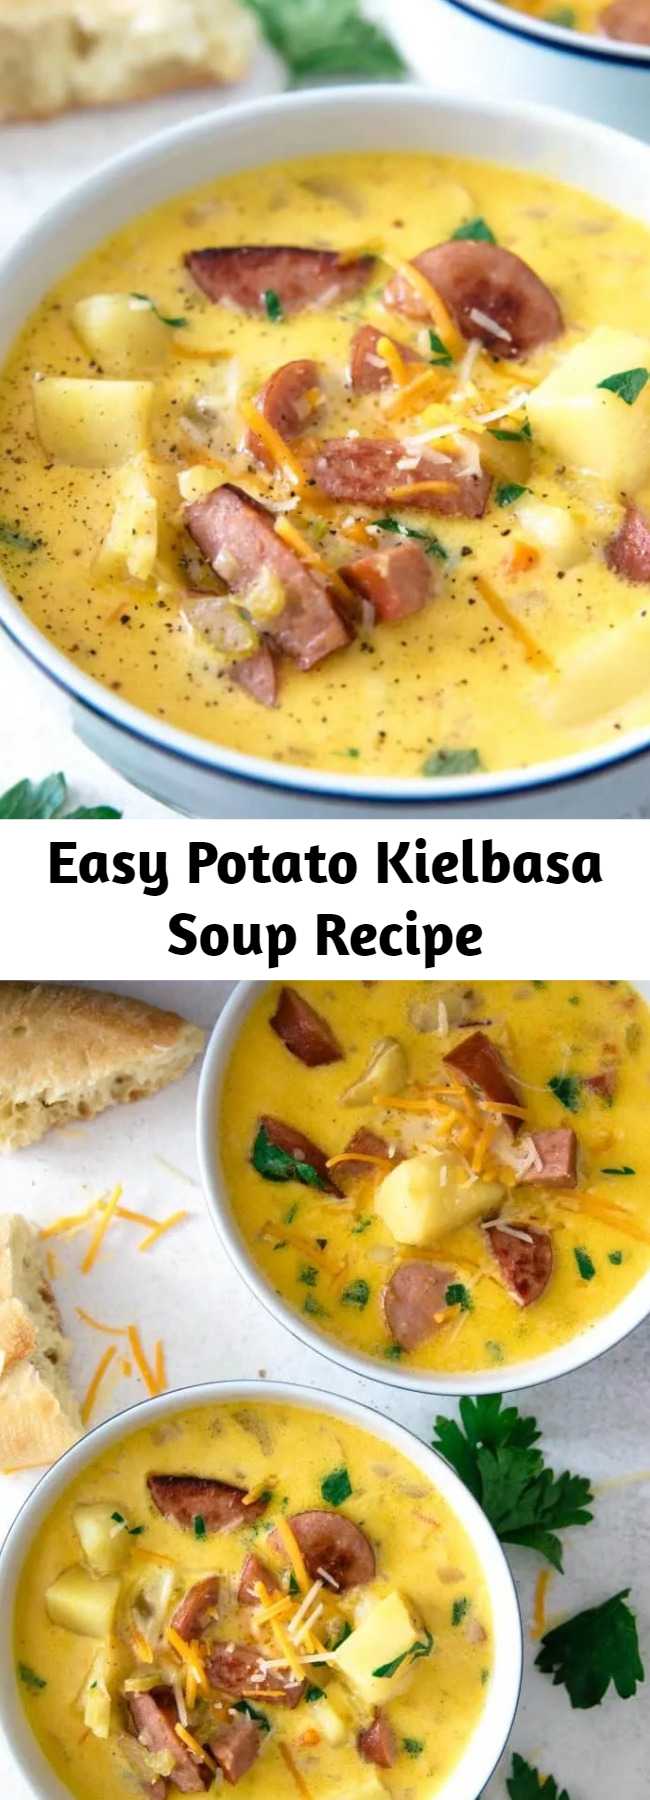 Easy Potato Kielbasa Soup Recipe - This potato kielbasa soup recipe is full of cheese, crispy sausage pieces, and potato chunks! It's a hearty and cheesy soup, perfect for lunch or dinner. Super cheesy!